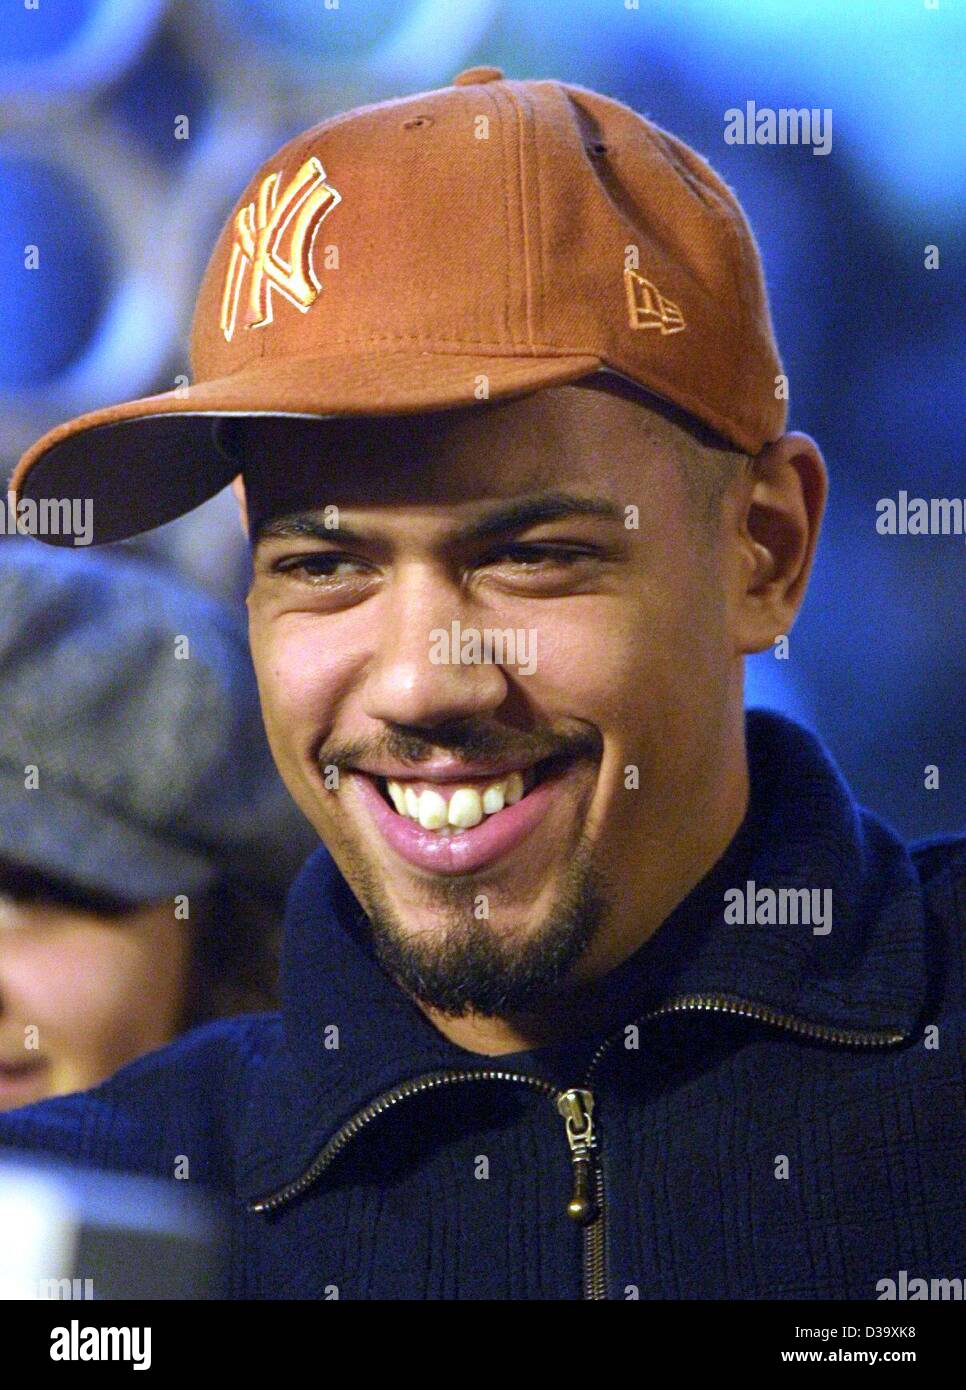 MTV awards ( dpa) - German singer Samy Deluxe during a press conference for the MTV Europe Music Awards ceremony in Frankfurt / Germany, 8.11.2001. Deluxe received the prize as 'Best German Act'. Artists of the international music scene were awarded in a total of 22 categories. Many of them preferre Stock Photo